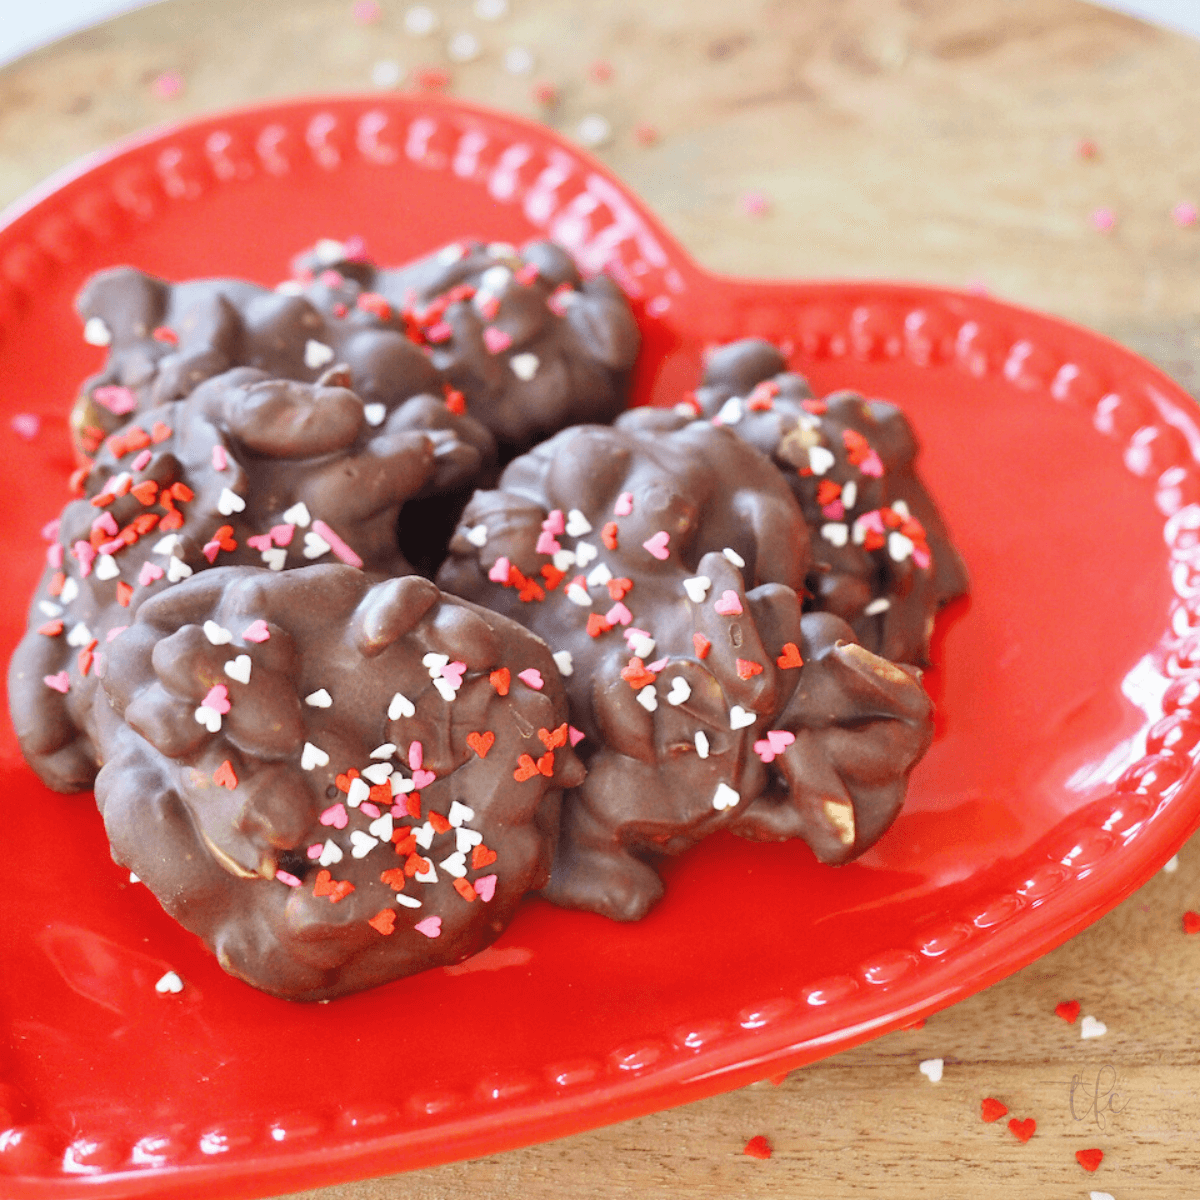 Crockpot Peanut Clusters on red heart plate with heart sprinkles.